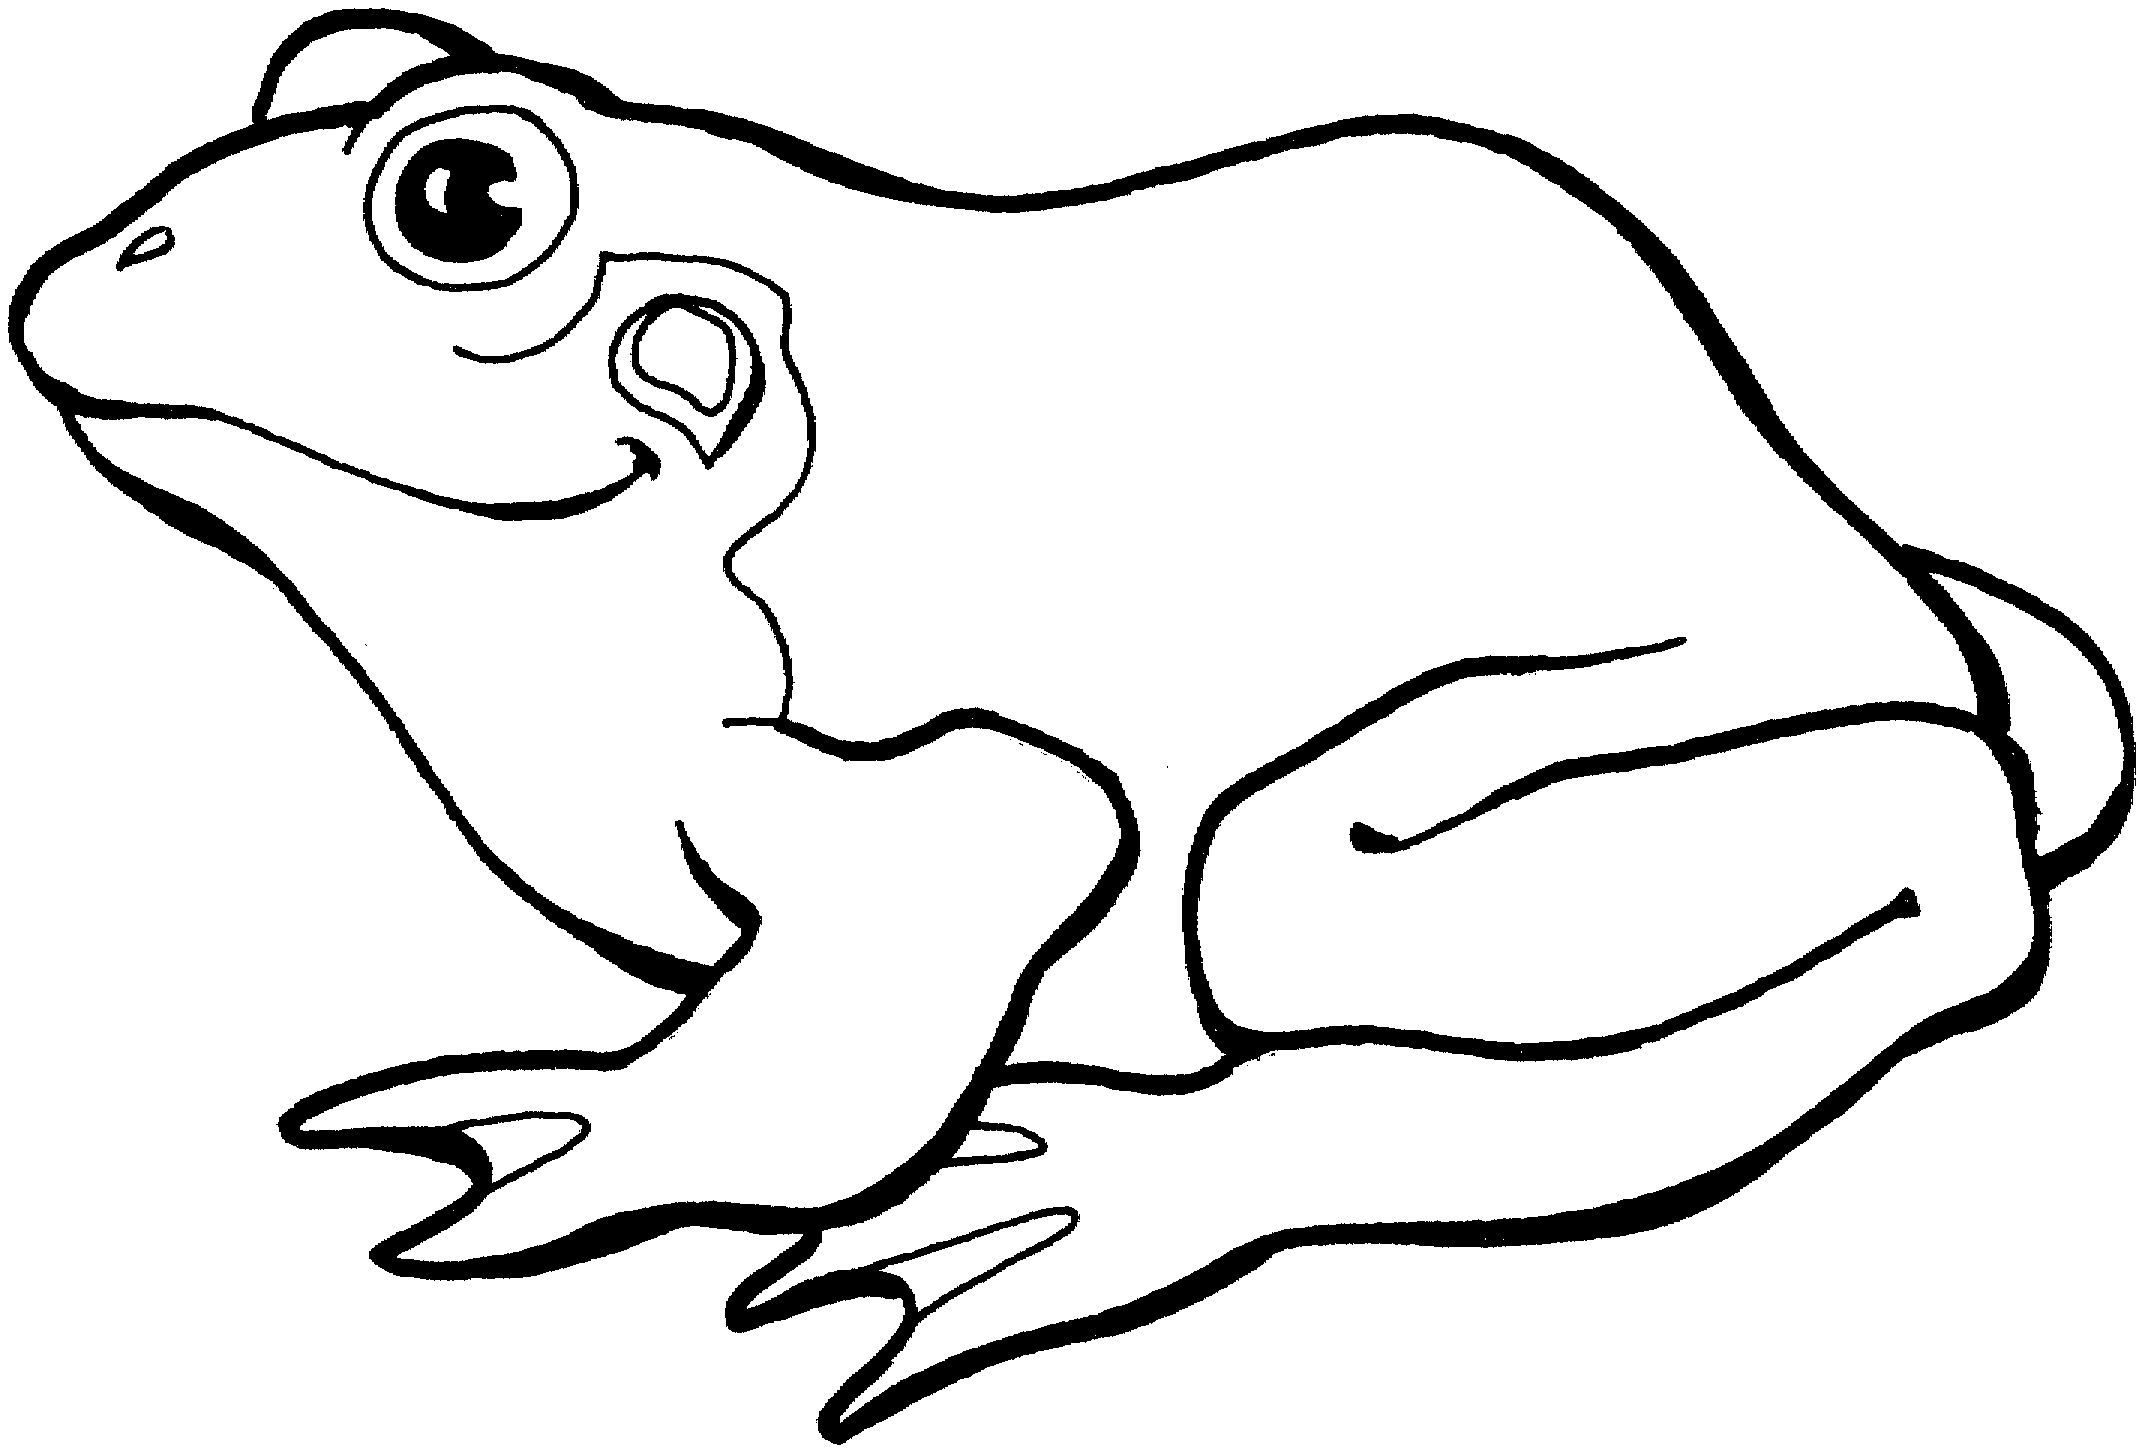 Frog  black and white frog clipart black and white 3